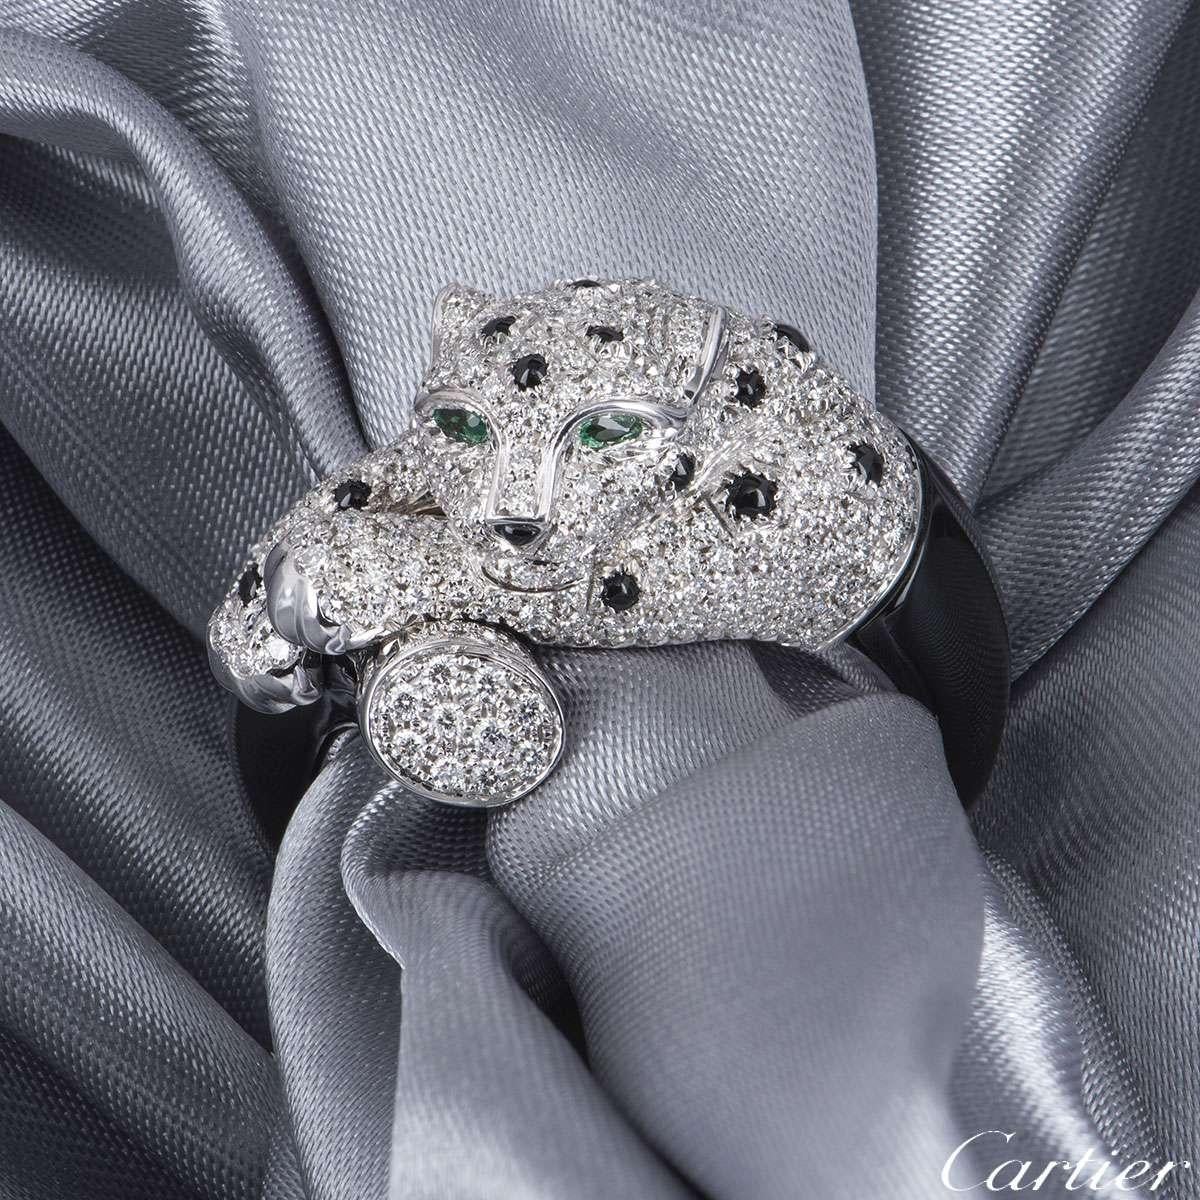 An extraordinary 18k white gold diamond and onyx ring from the Panthere de Cartier collection. The Panther is set with pave round brilliant cut diamonds with spots of onyx scattered on the body and has two emeralds set as the eyes. There are 292